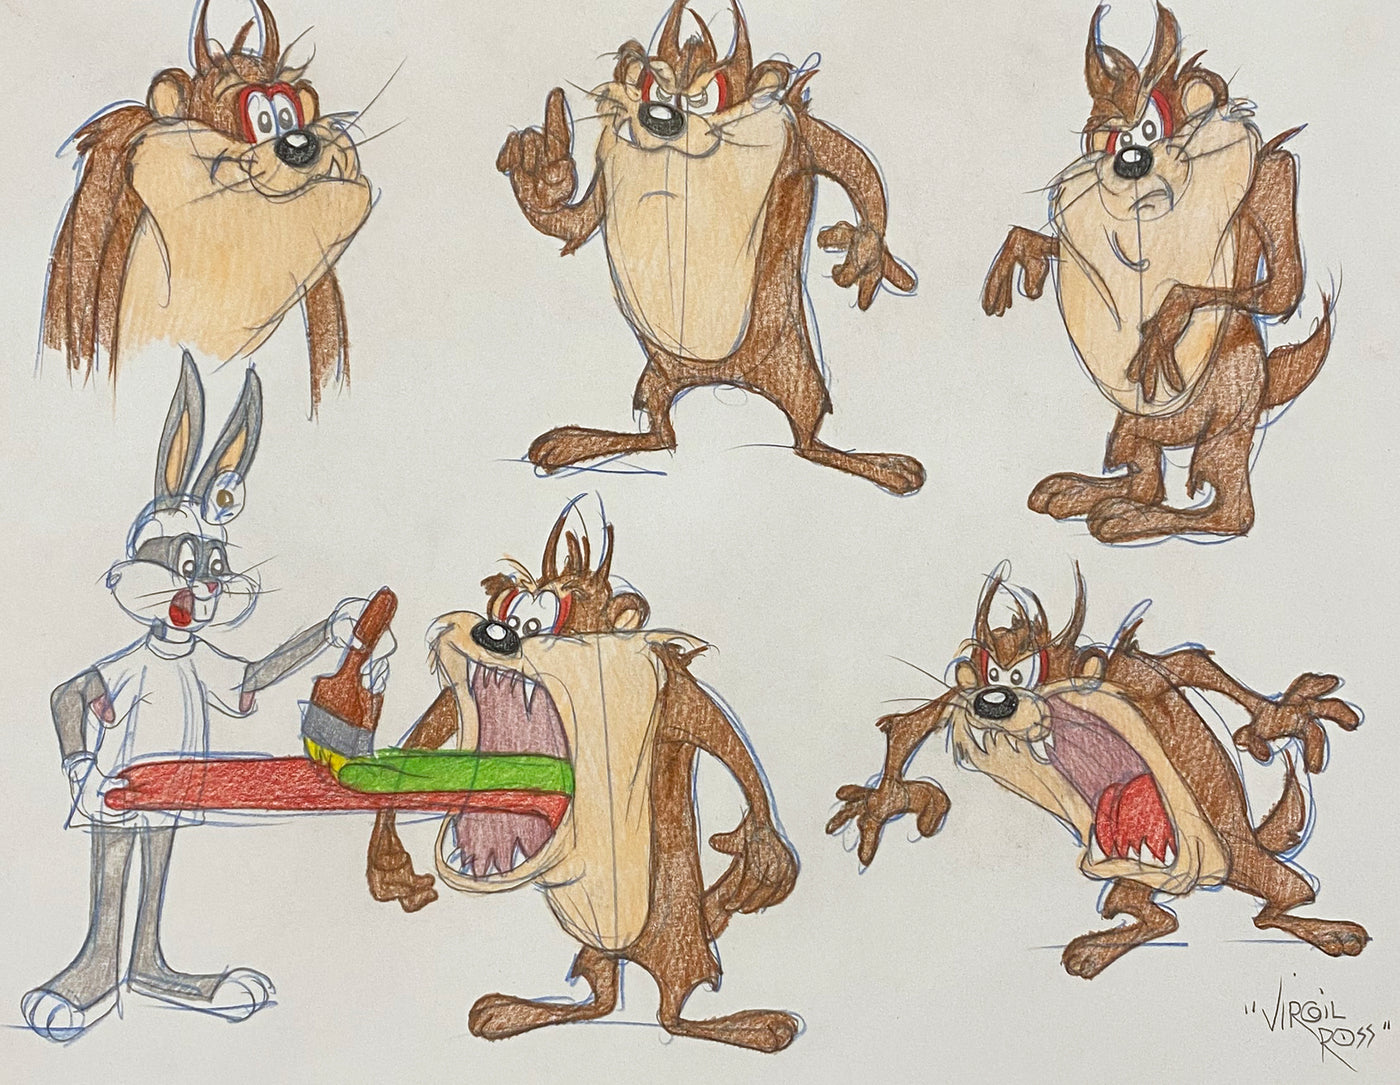 Original Warner Brothers Virgil Ross Model Sheet Animation Drawing featuring the Tasmanian Devil and Bugs Bunny